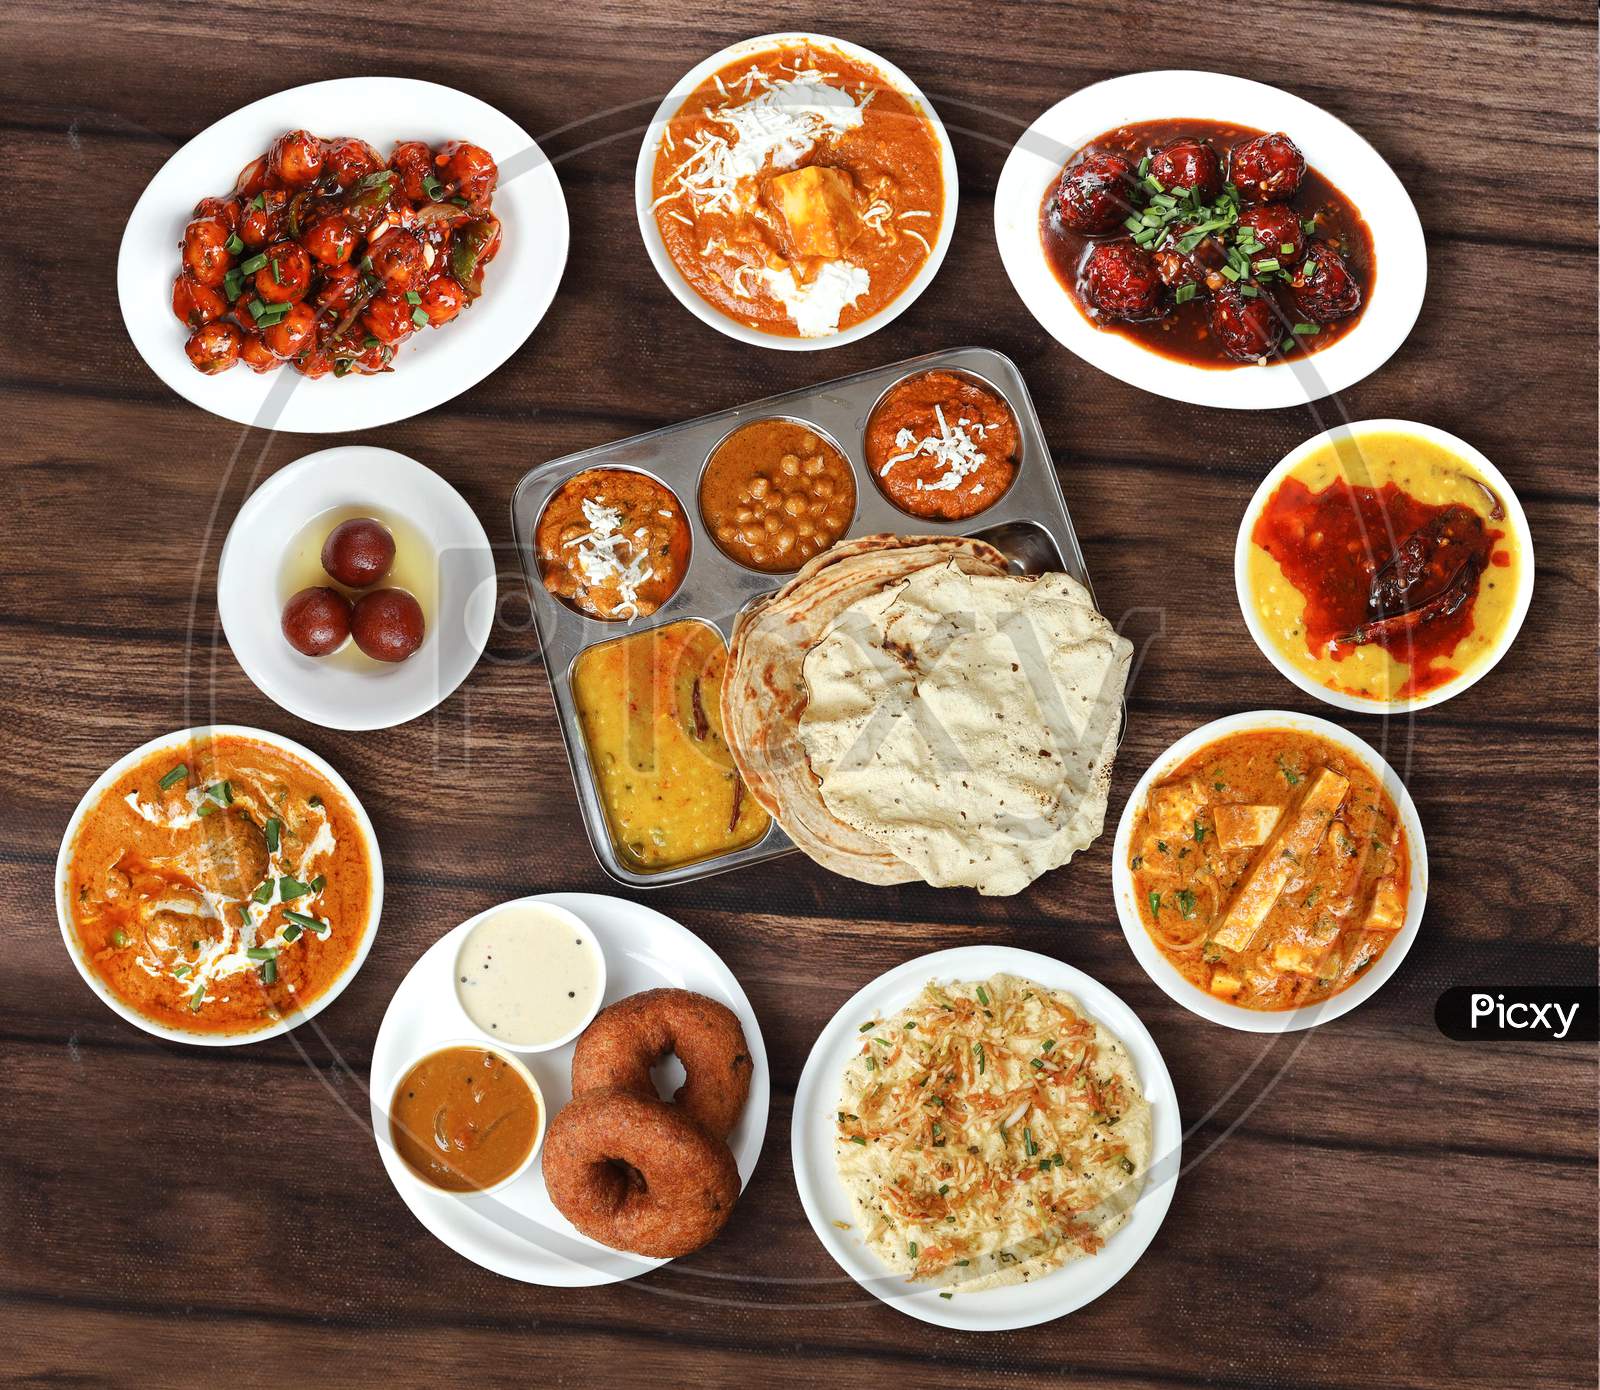 Assorted north indian foods Veg thali,roti,malai kofta,paneer butter masala,veg manchurian and biryani on wooden background. Dishes and appetizers of indian cuisine